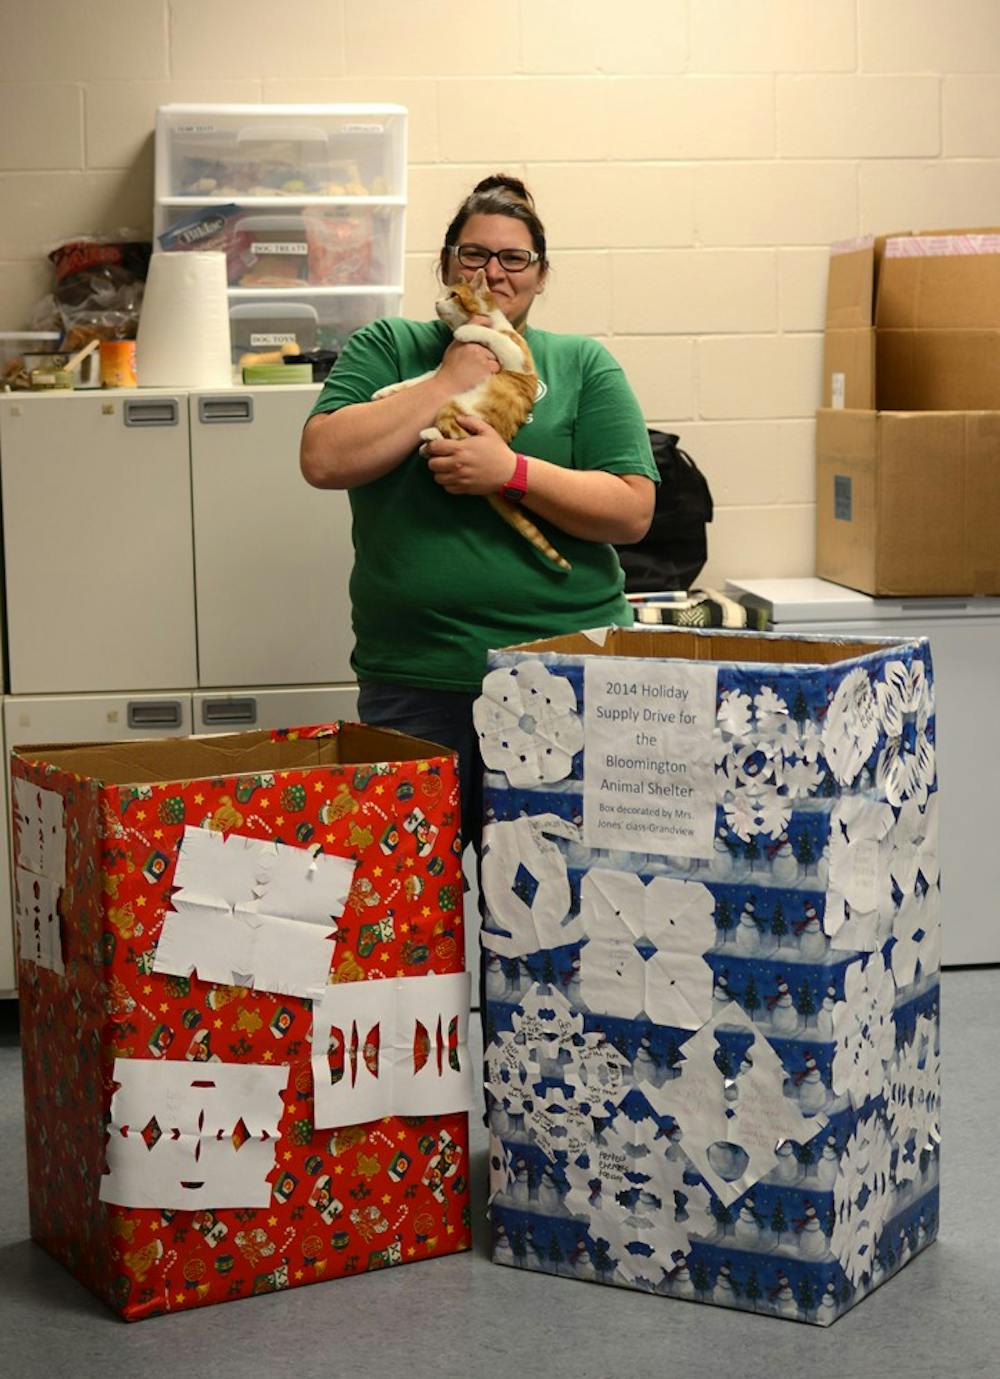 Jenny Gibson, volunteer coordinator of Bloomington Animal Shelter, stands behind donations boxes volunteers have been working on for the Holiday Pet Supply Drive. Donation boxes will be put into multiple locations around Bloomington, including City Hall, Bloomingfoods and Kroger stores to gather more supplies starting Monday.